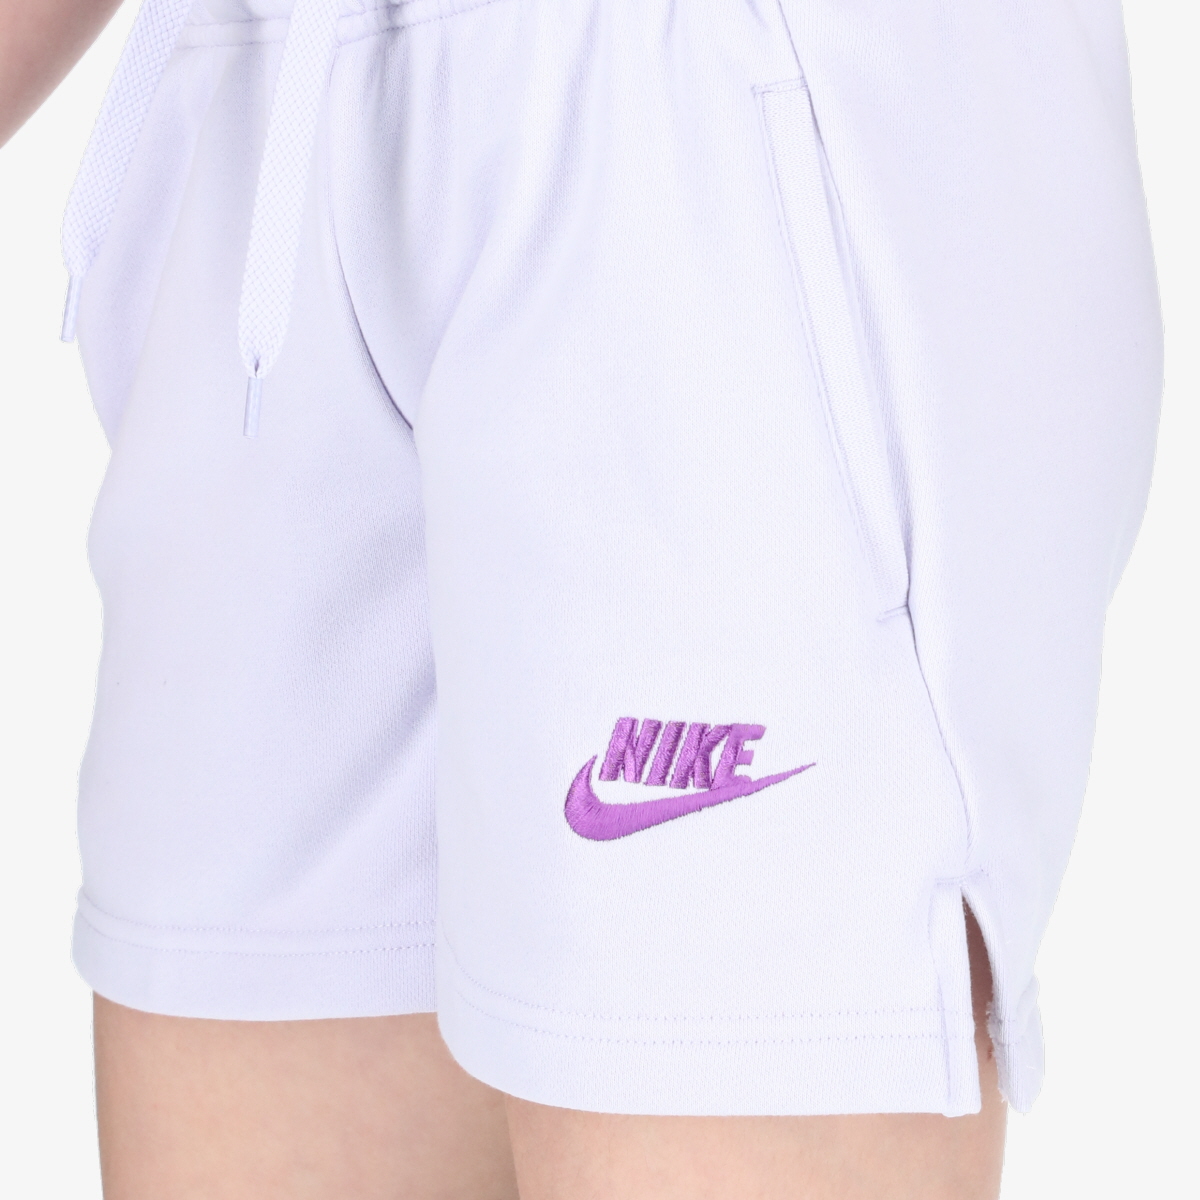 Nike G NSW CLUB FT 5 IN SHORT 